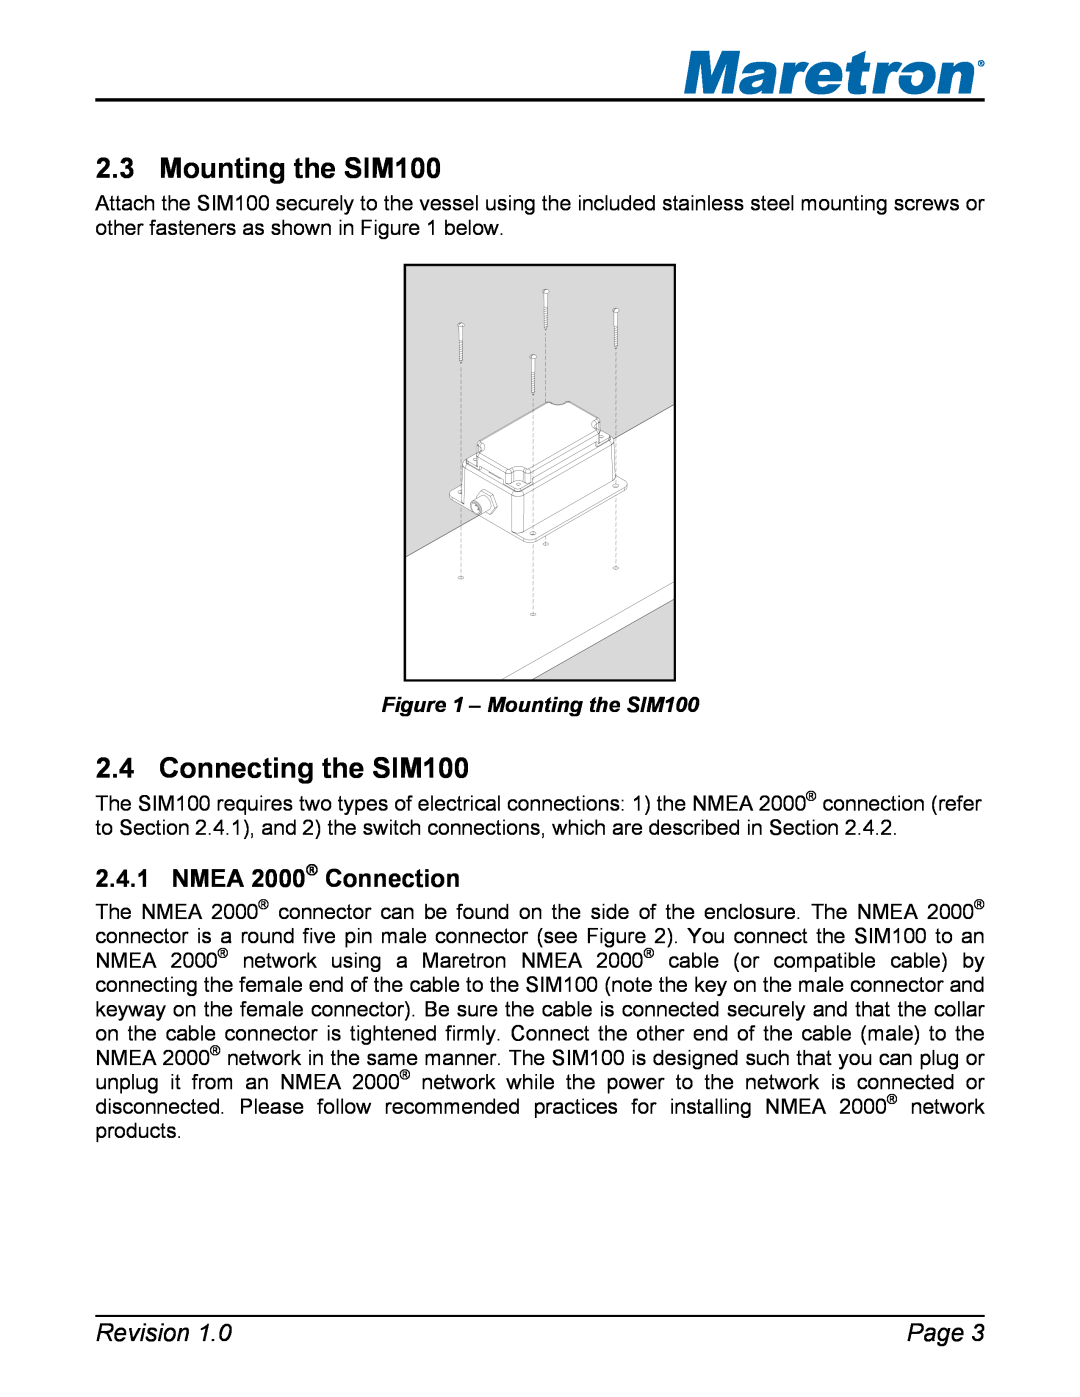 Maretron user manual Mounting the SIM100, Connecting the SIM100, NMEA 2000 Connection, Revision, Page 